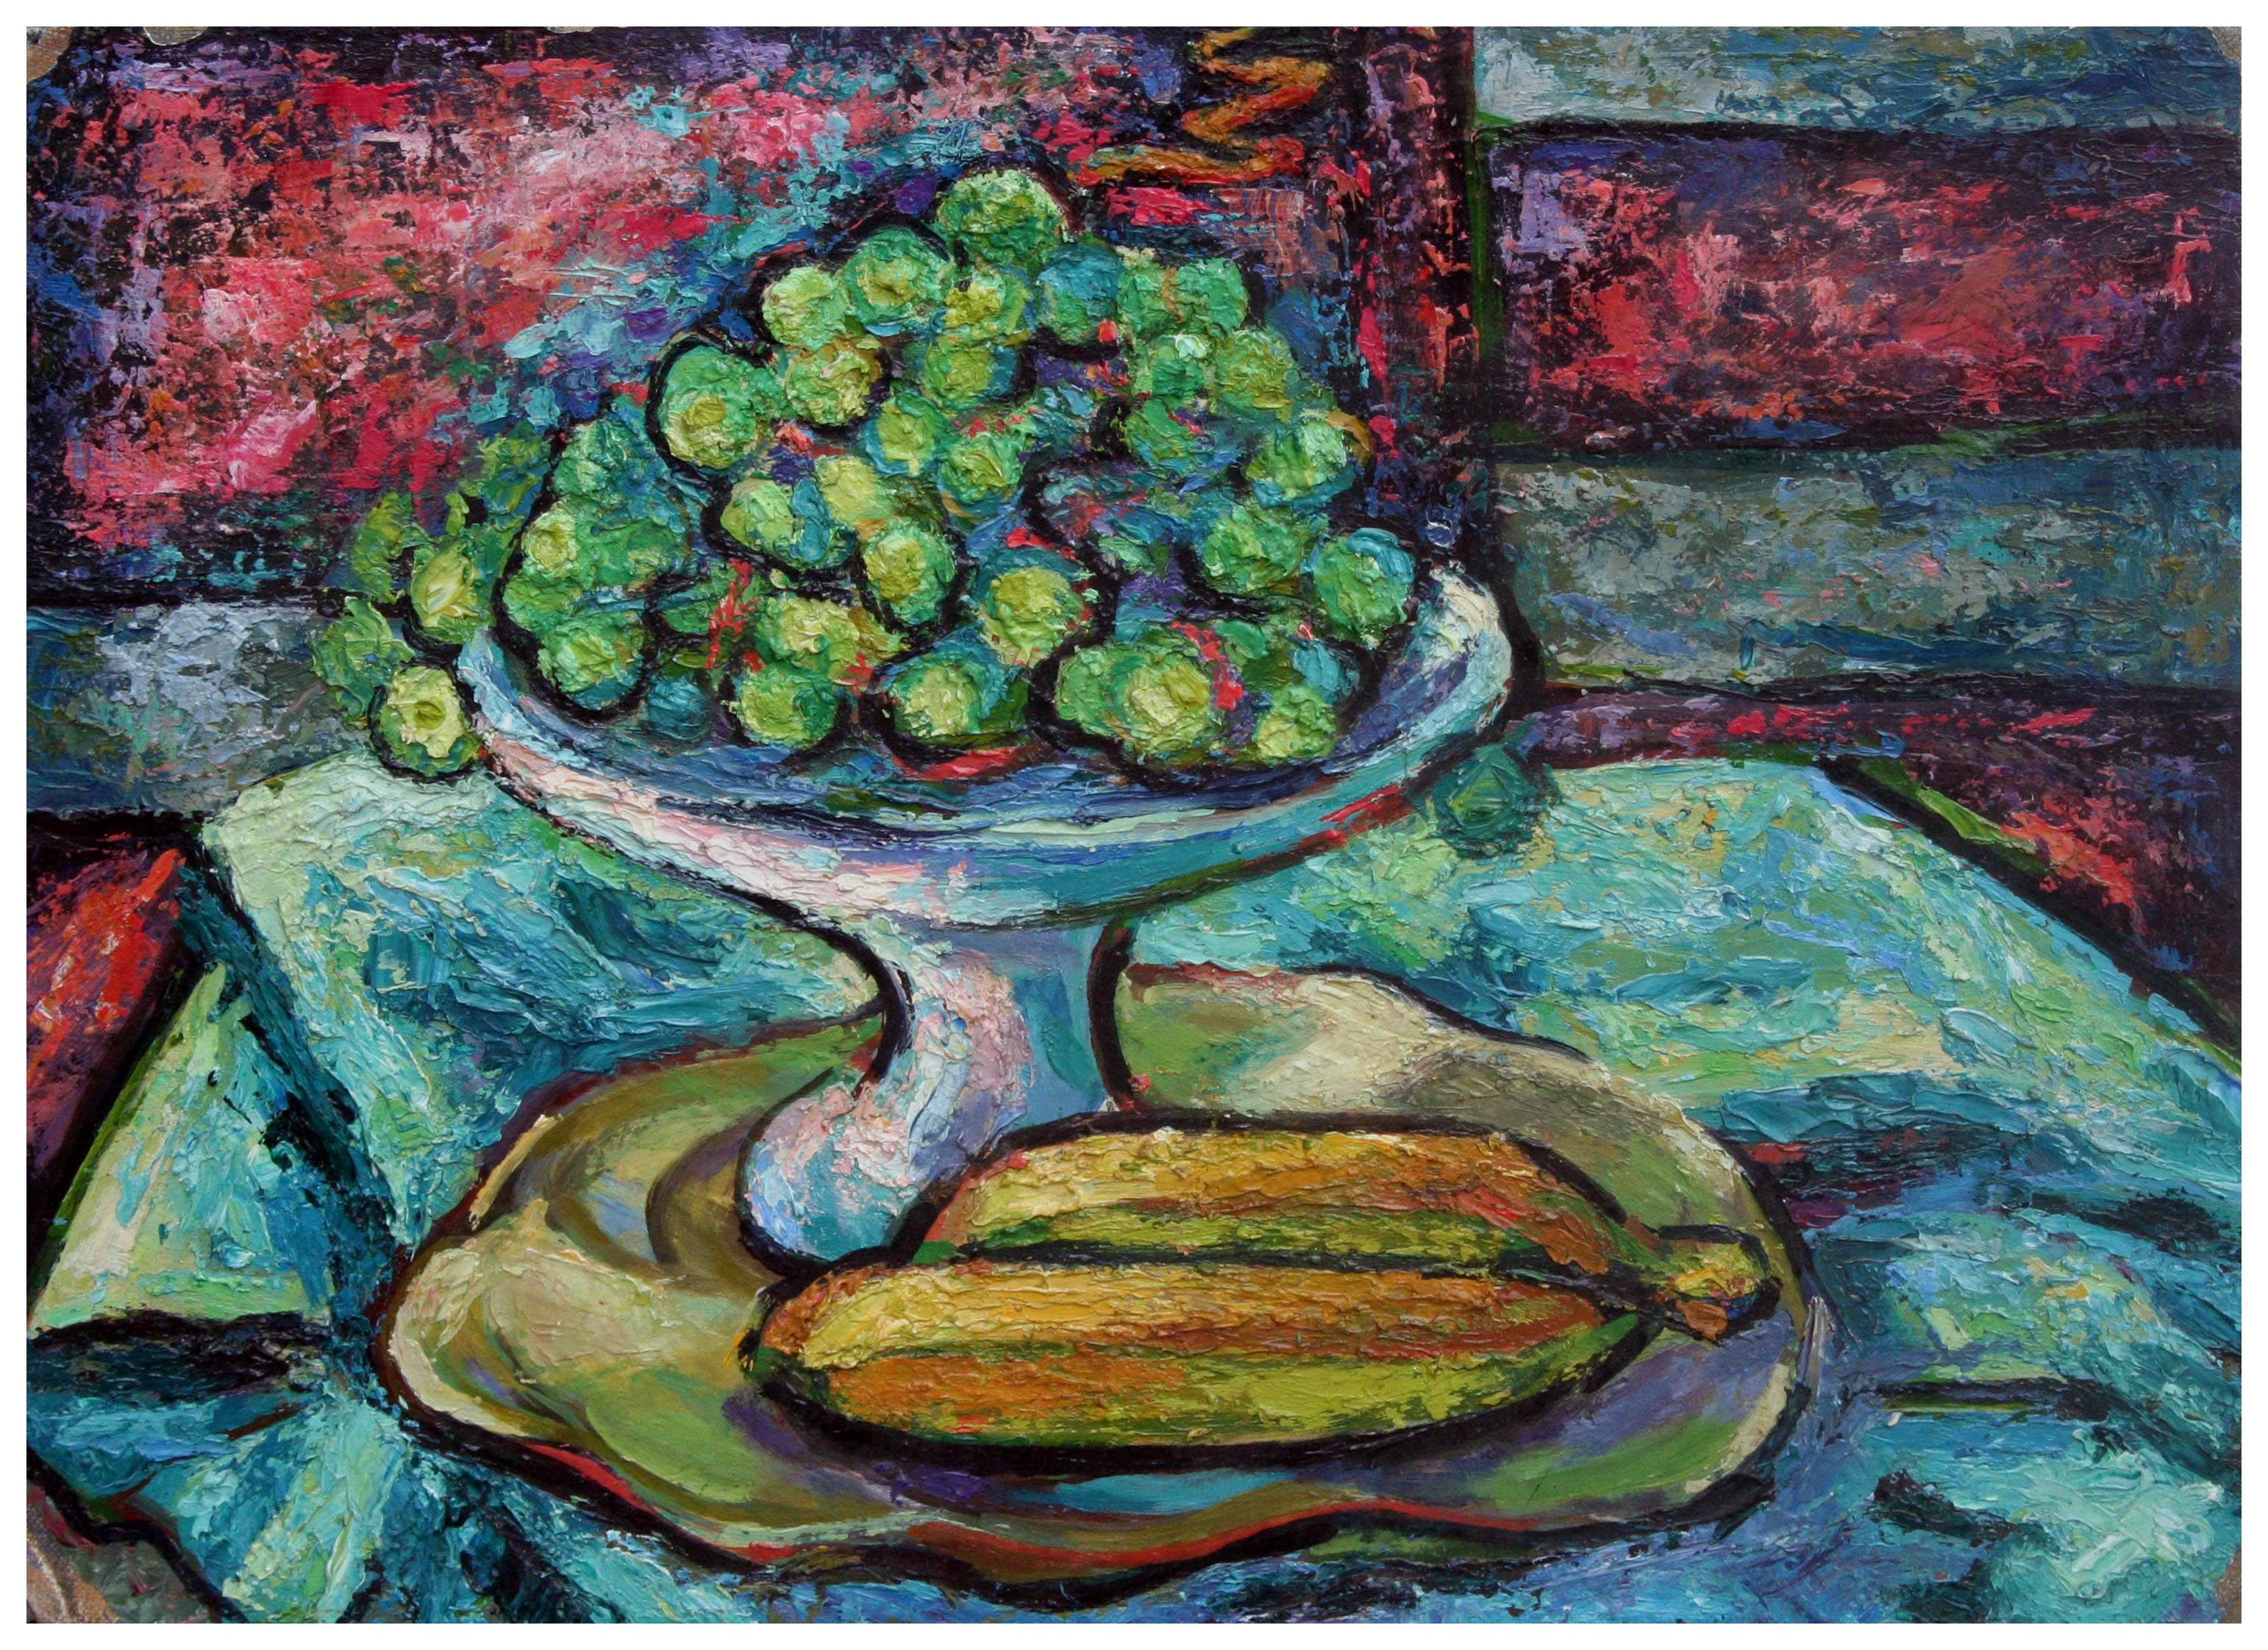 Fauvist Grapes and Bananas, Mid Century Modern Impasto Fruit Still-Life - Painting by Virginia Sevier Rogers